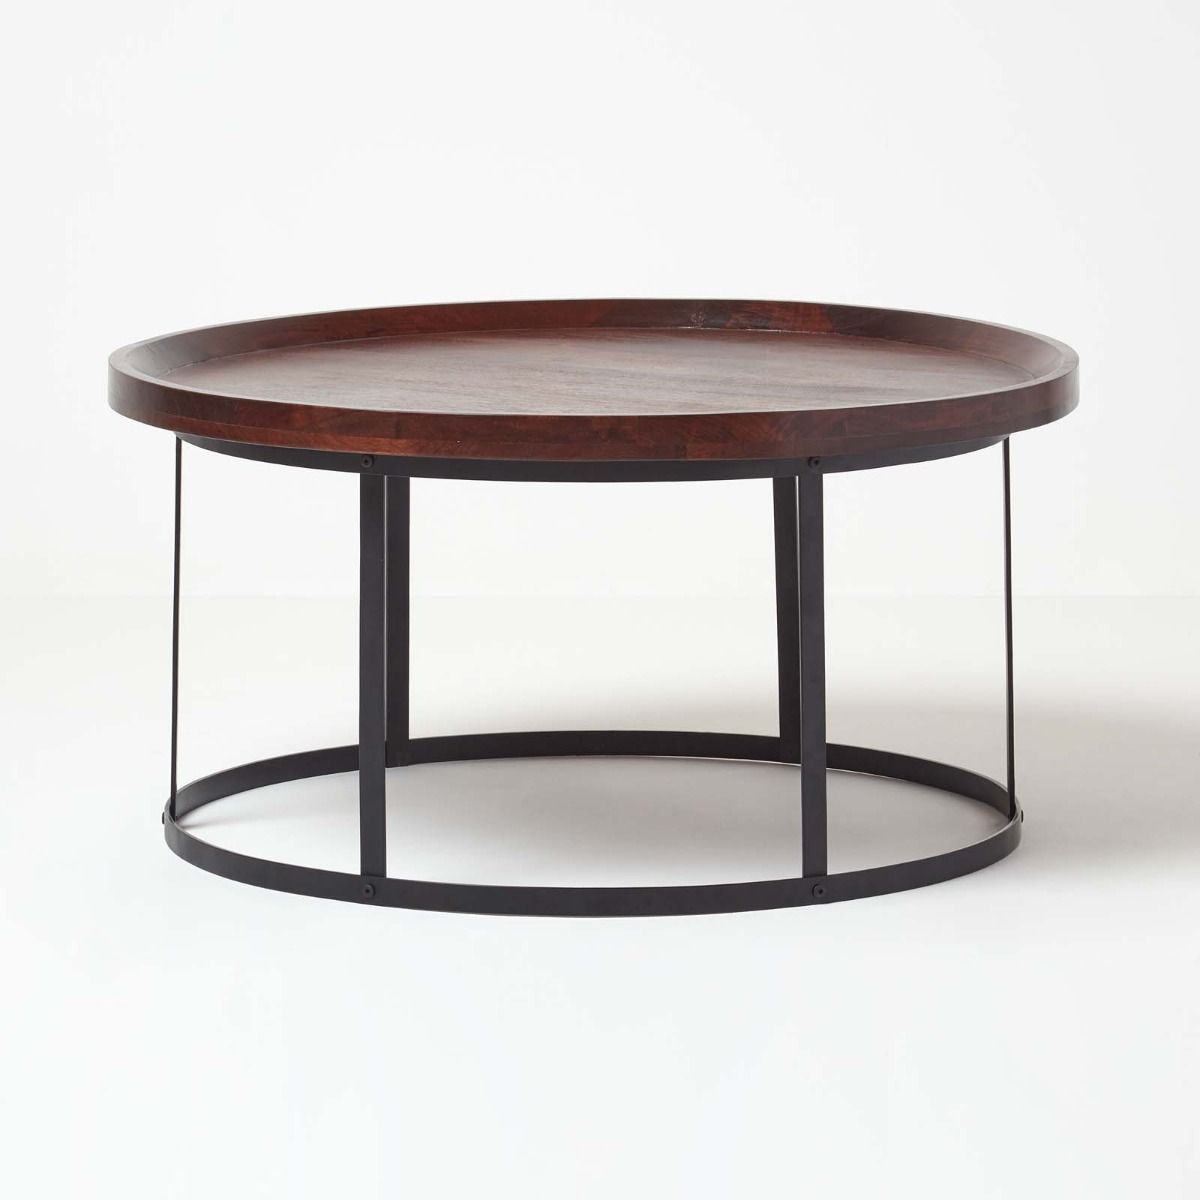 Industrial Round Coffee Table With Dark Wood Top And Steel Frame Intended For Round Industrial Coffee Tables (View 6 of 15)